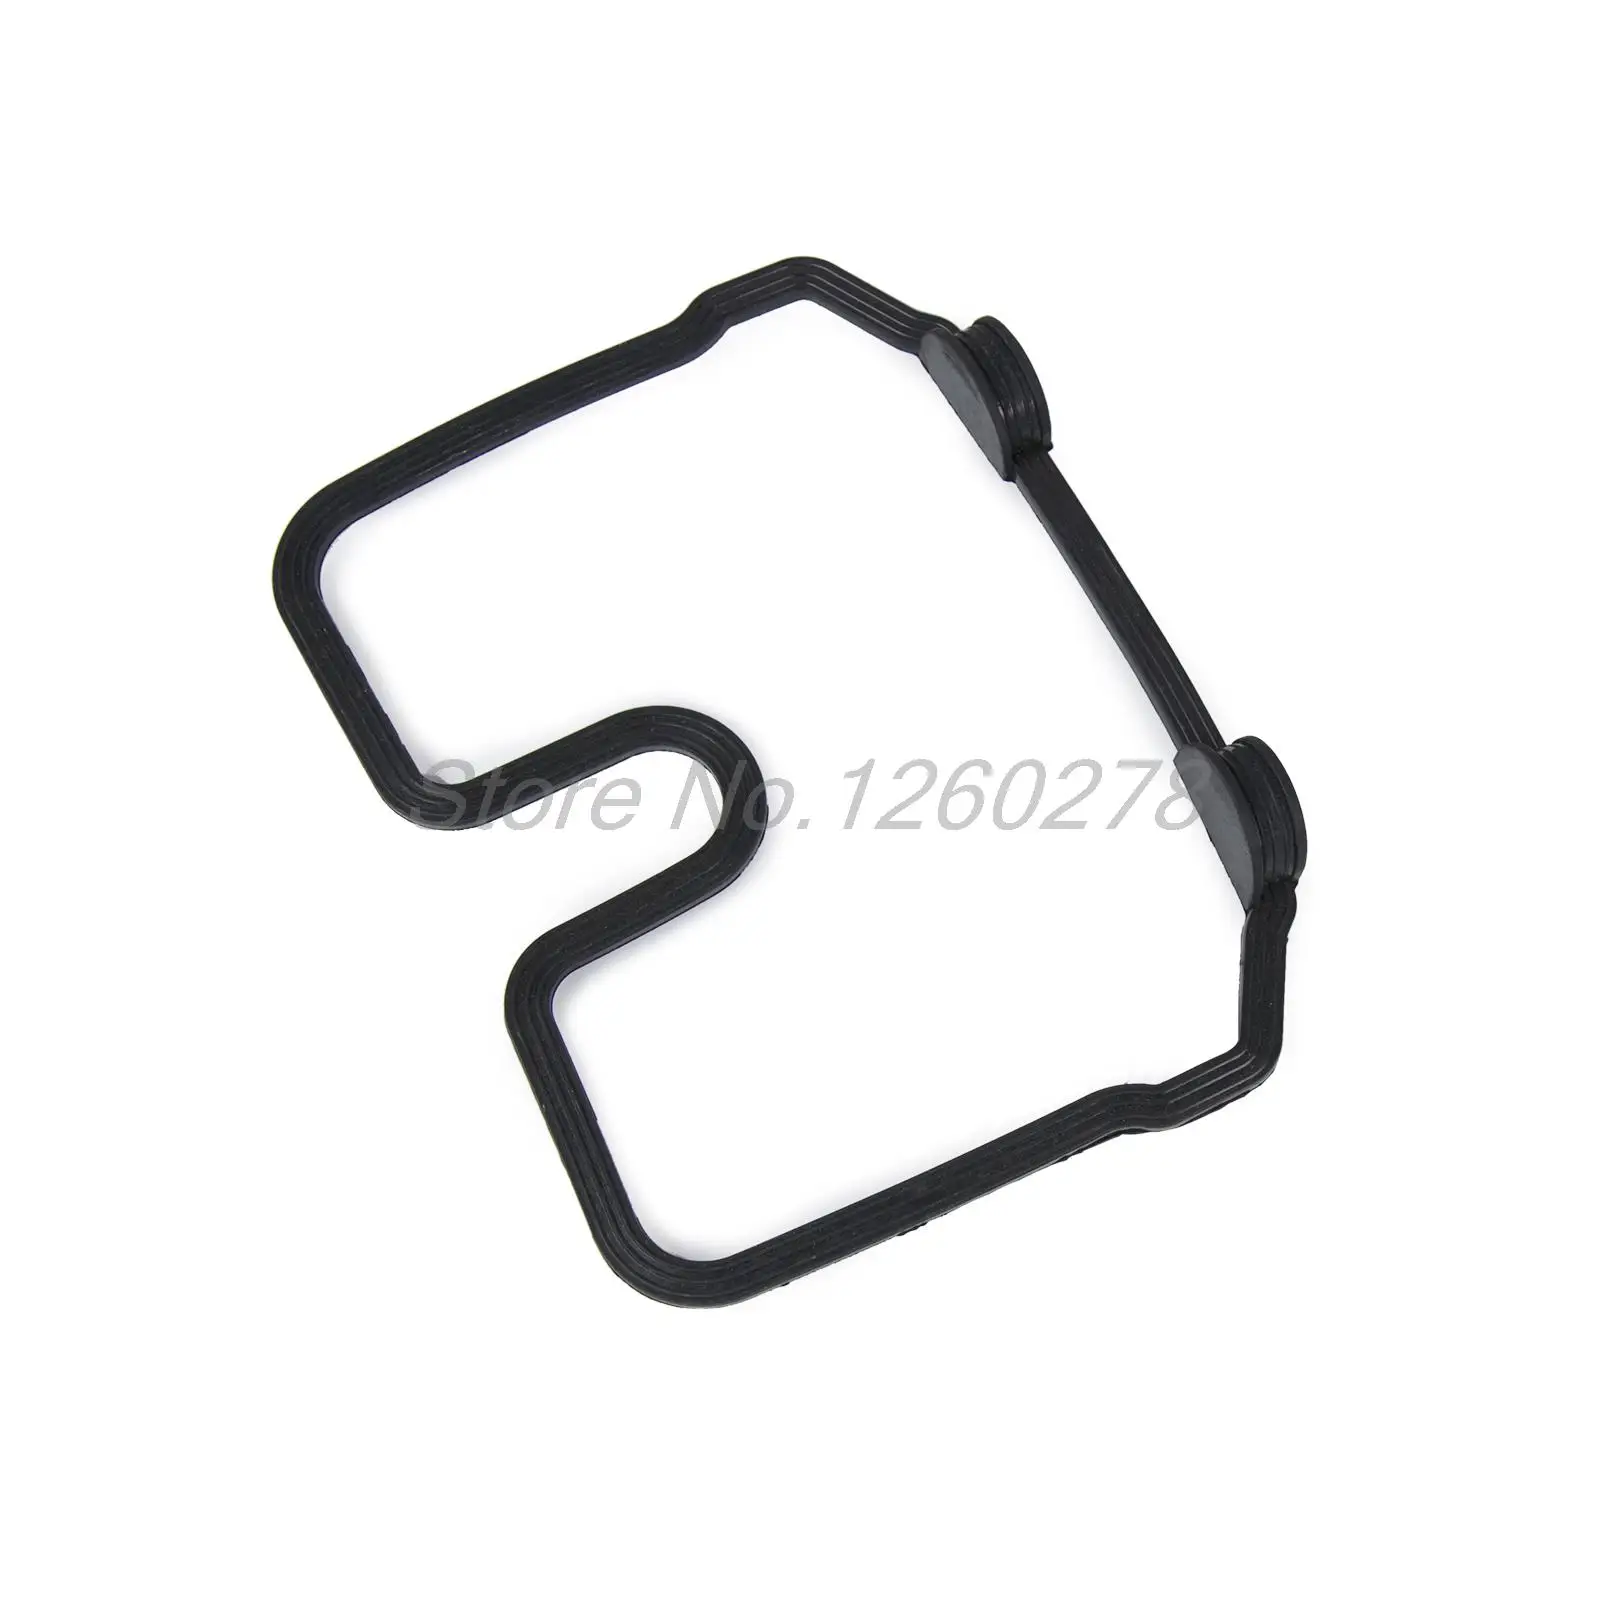 

Motorcycle Parts Cylinder Head Cover Gasket for Honda NX250 AX-1 1988 - 1994 1989 1990 1991 1992 1993 AX1 NX 250 new